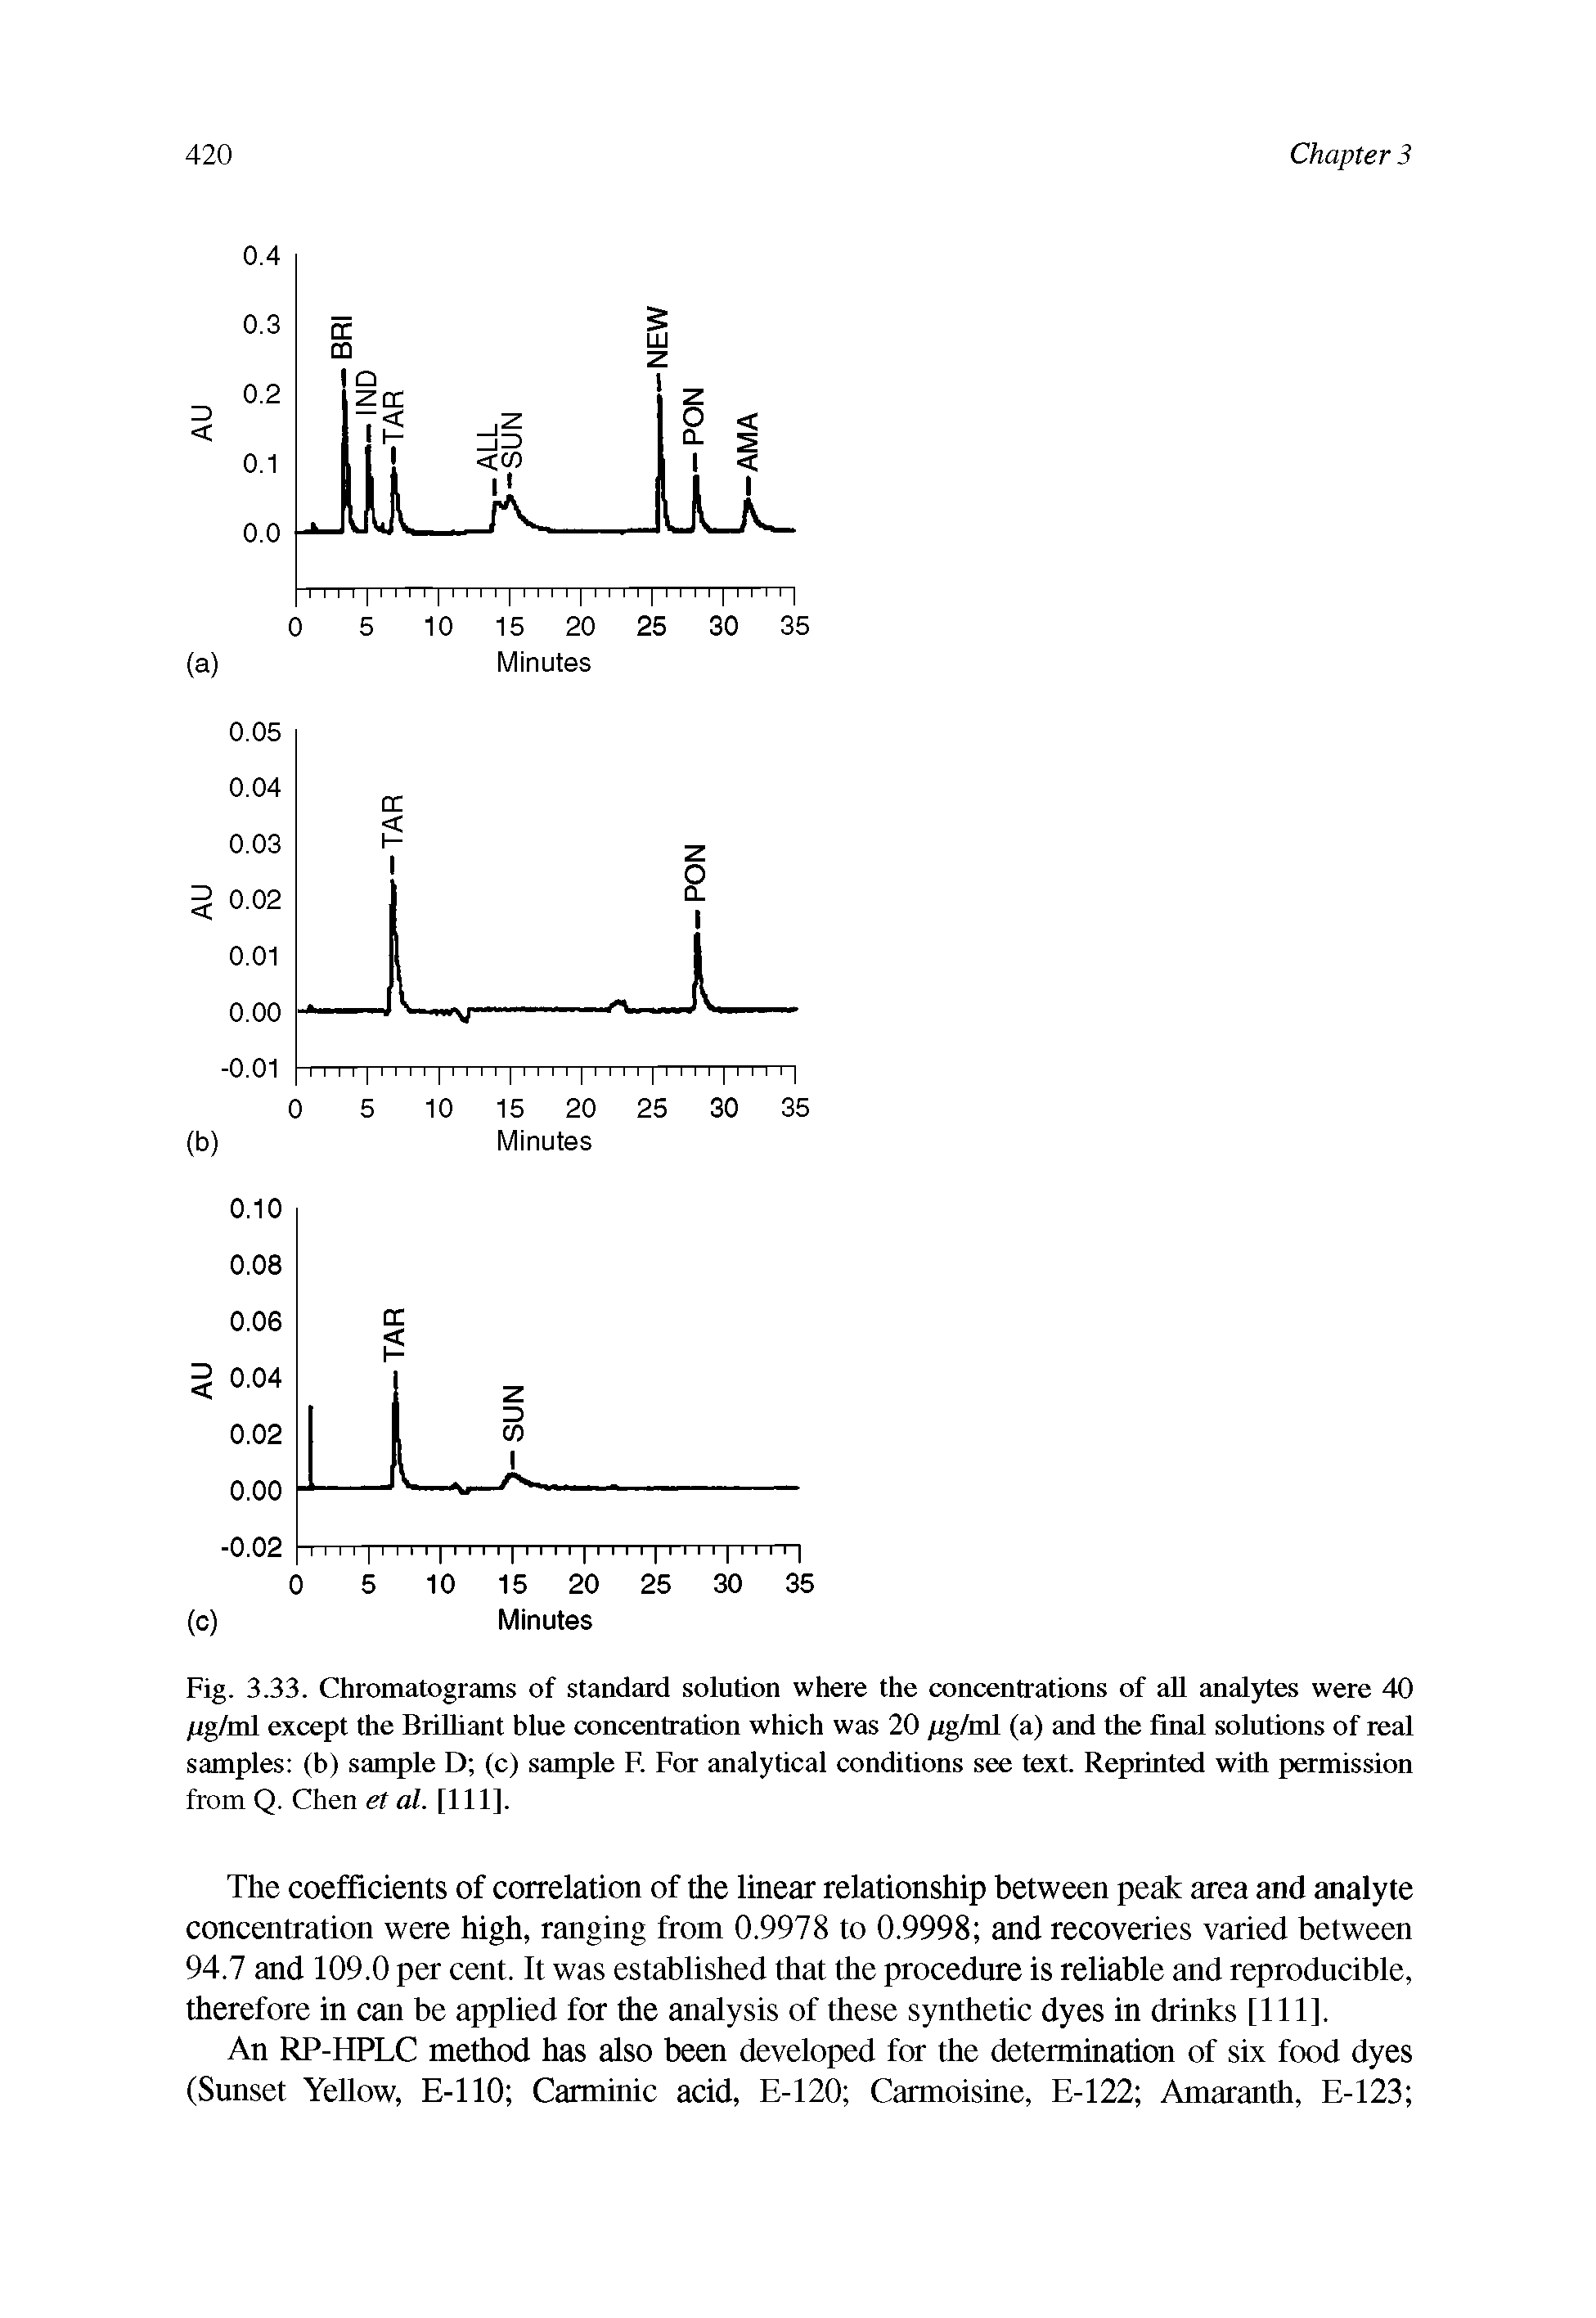 Fig. 3.33. Chromatograms of standard solution where the concentrations of all analytes were 40 /ig/m I except the Brilliant blue concentration which was 20 jug/ml (a) and the final solutions of real samples (b) sample D (c) sample F. For analytical conditions see text. Reprinted with permission from Q. Chen et al. [111].